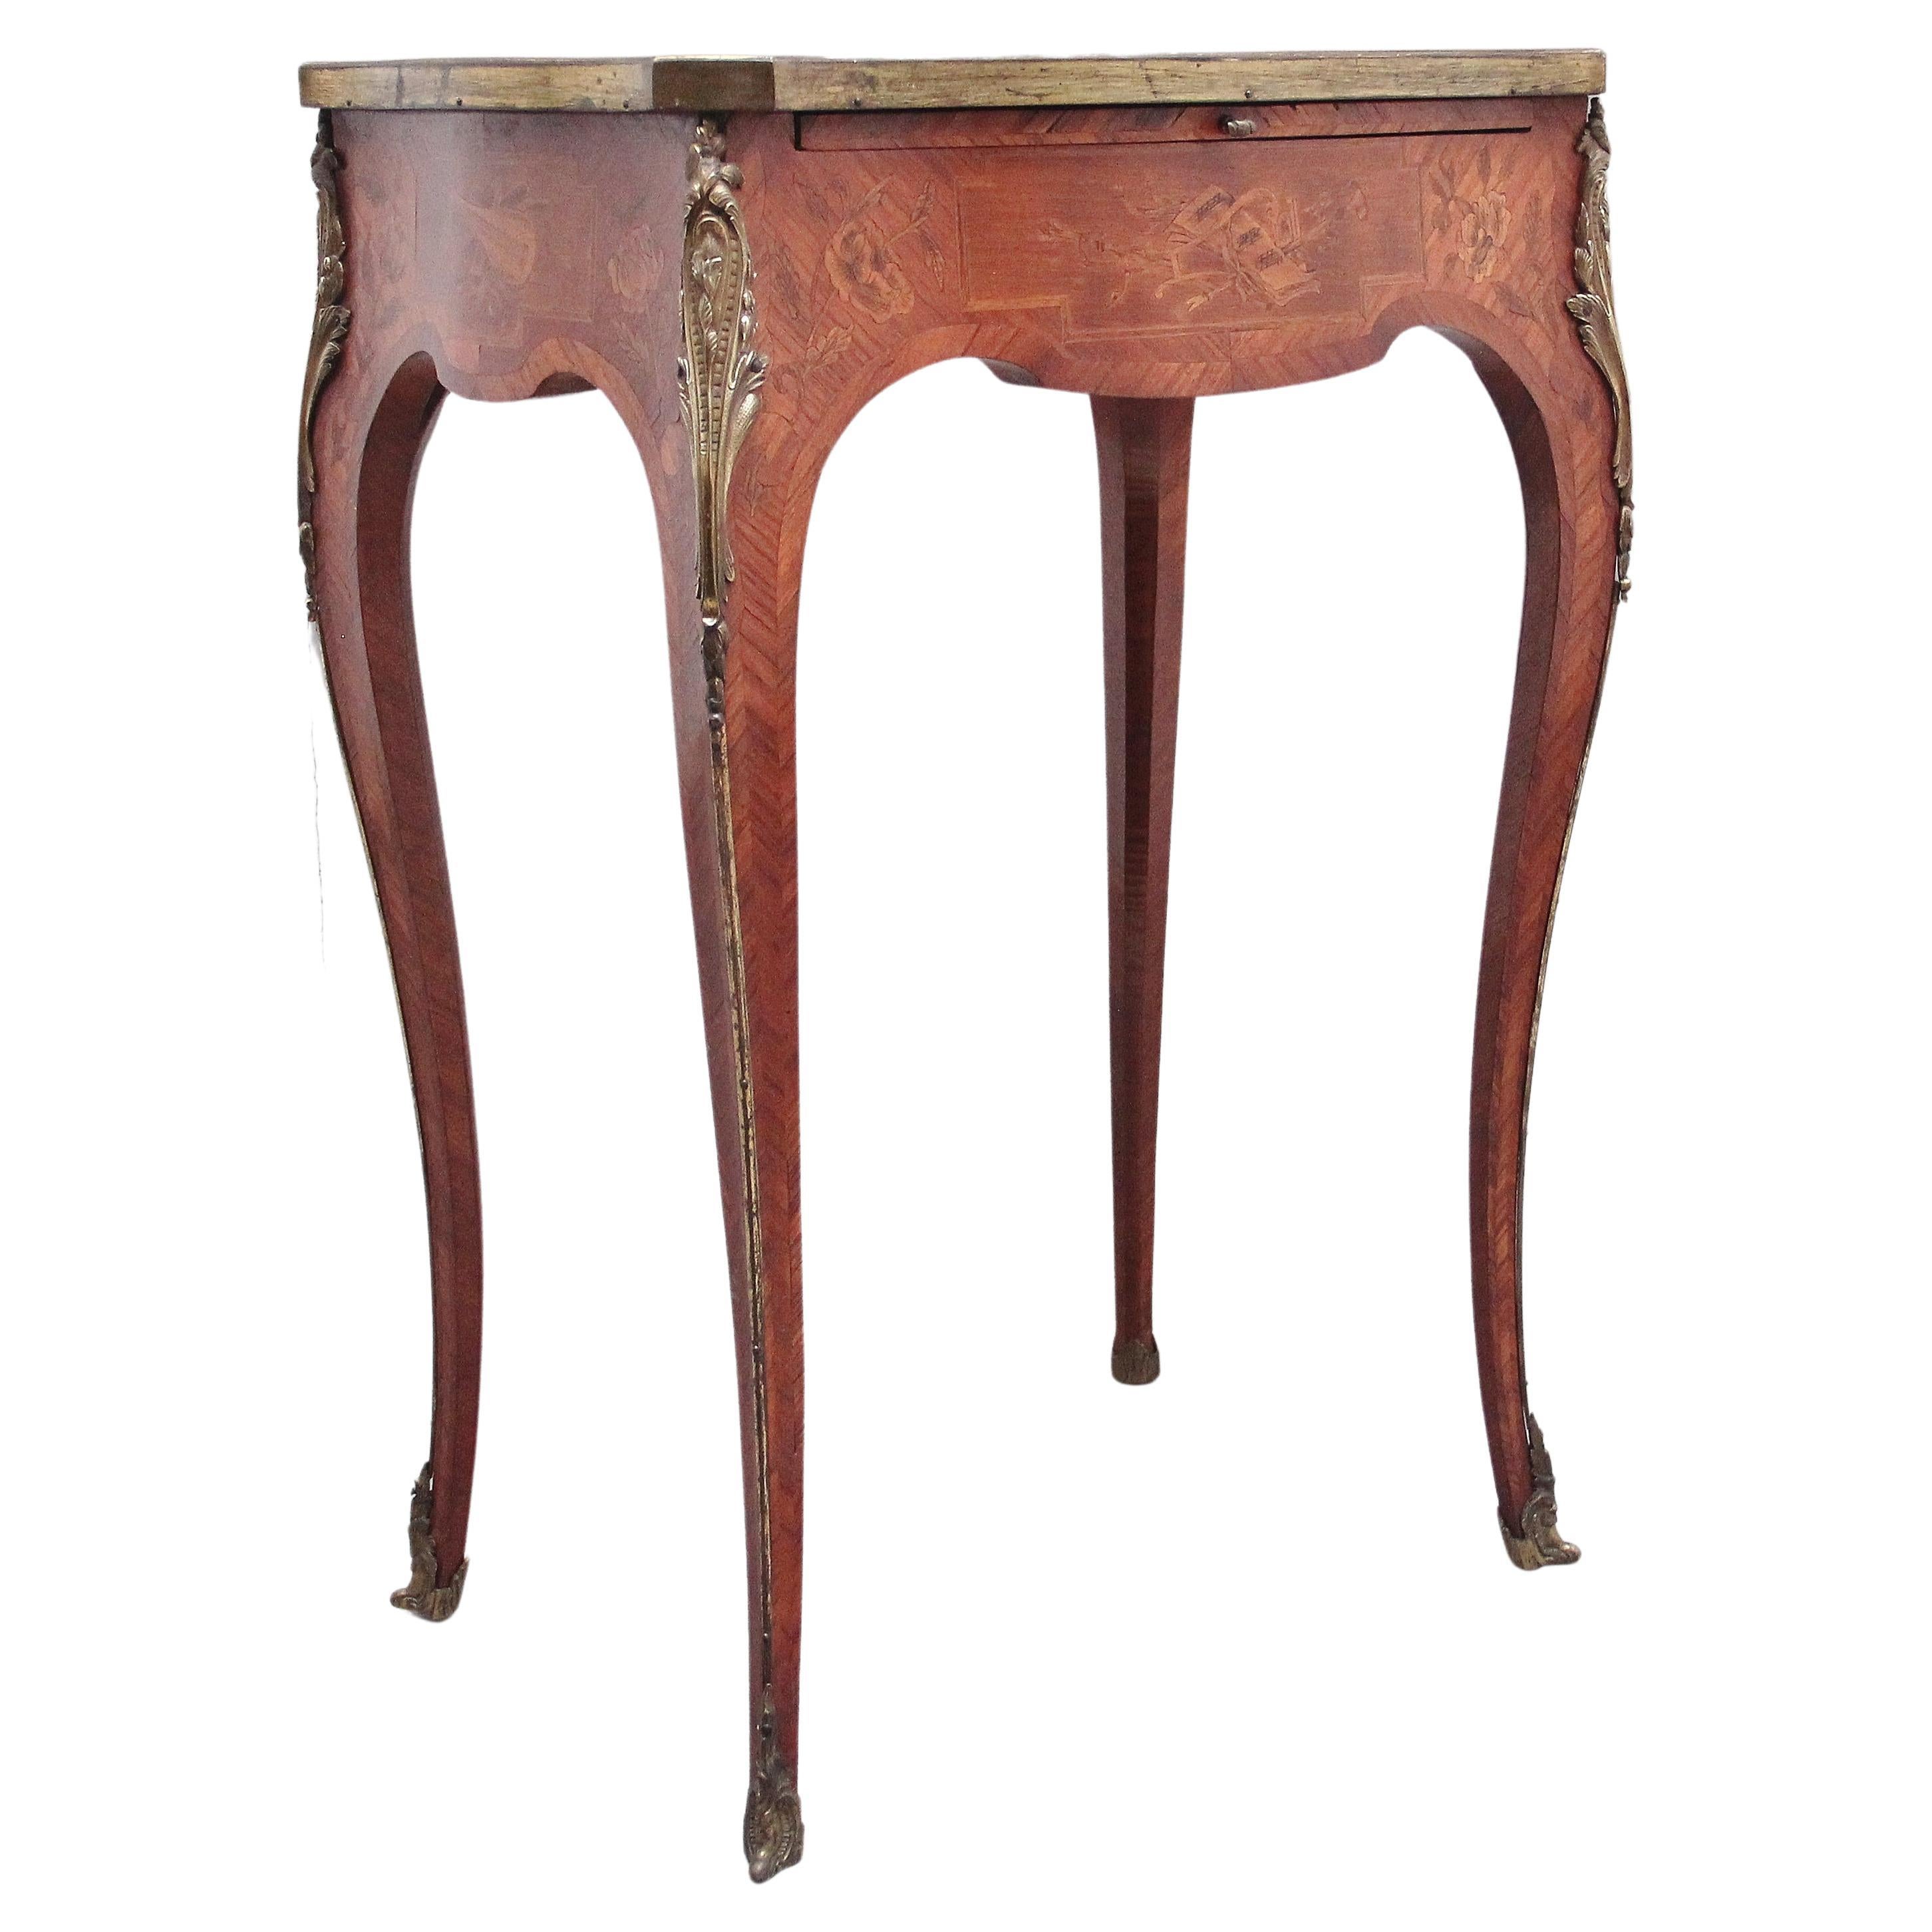 Early 20th Century French Kingwood and Marquetry Side Table